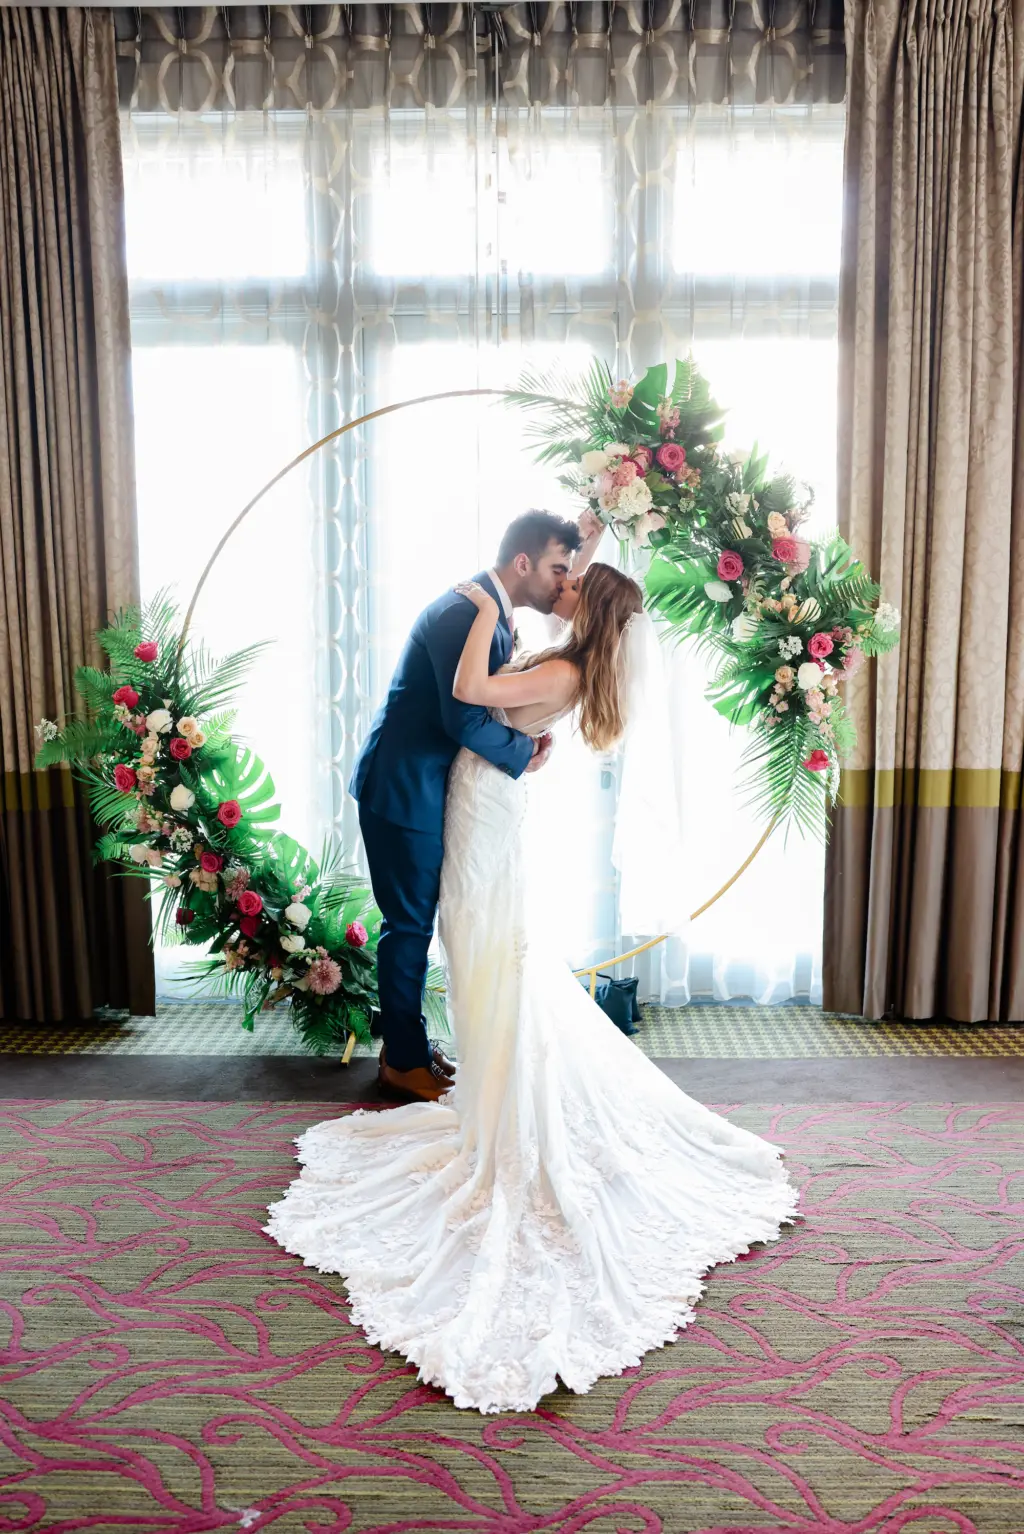 Bride and Groom First Kiss Infront of Gold Circle Arch with Tropical Florals in Indoor Wedding Ceremony | St. Pete Planner Coastal Coordinating | Wedding Photographer Lifelong Photography | Venue The Birchwood